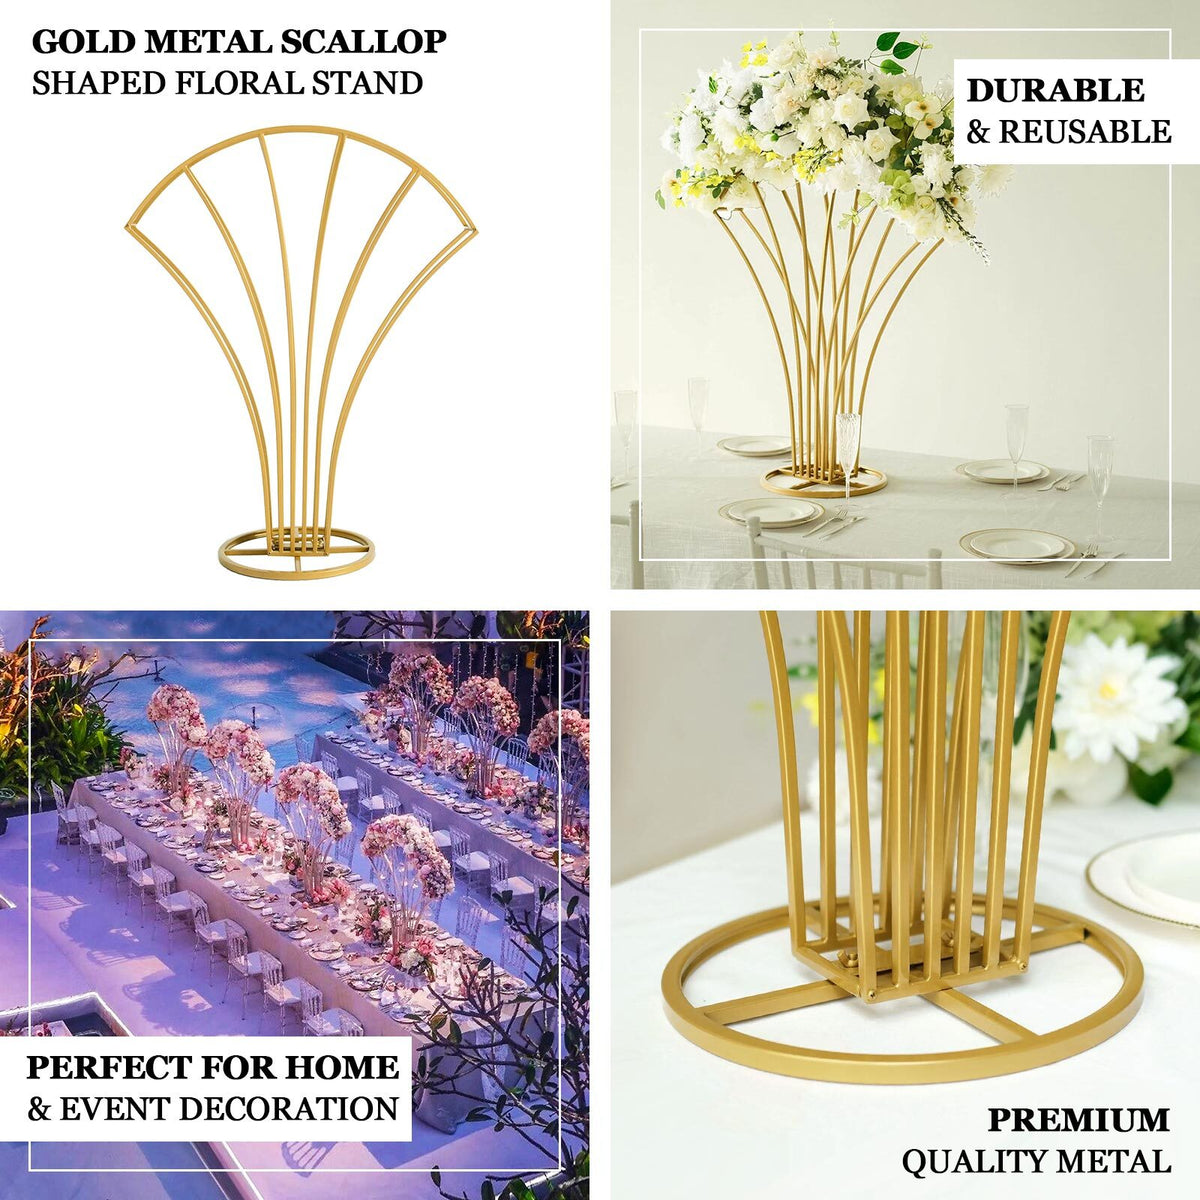 32 Scalloped Fan Metal Flower Display Stand Table Centerpiece - Gold